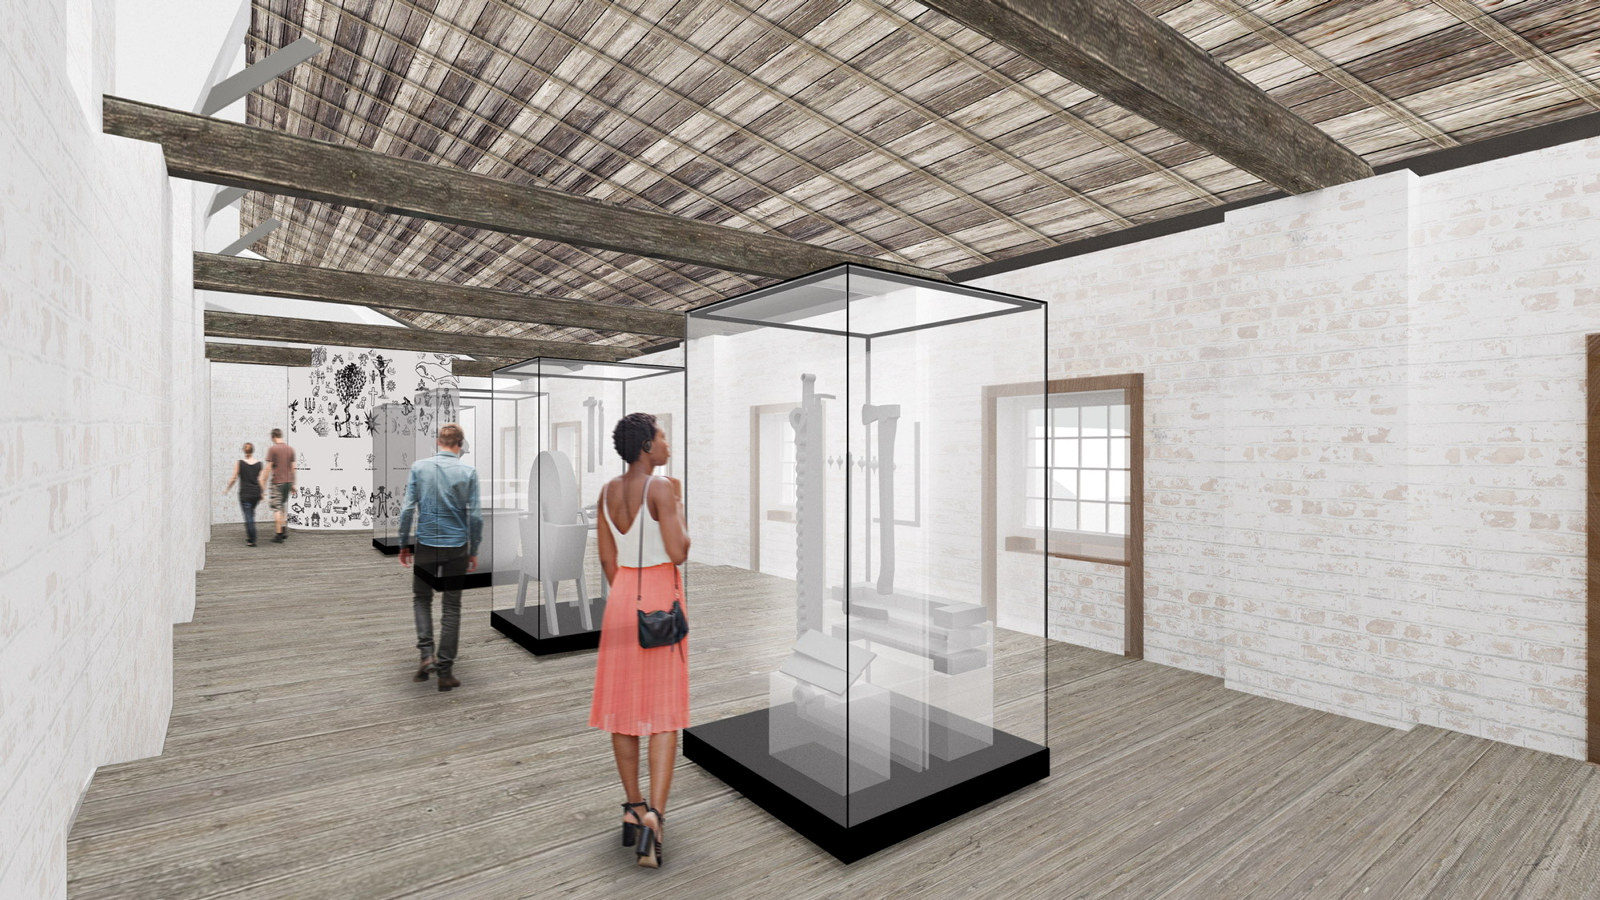 Artist's rendition of white painted room with exposed ceiling beams, with showcases and people for scale.